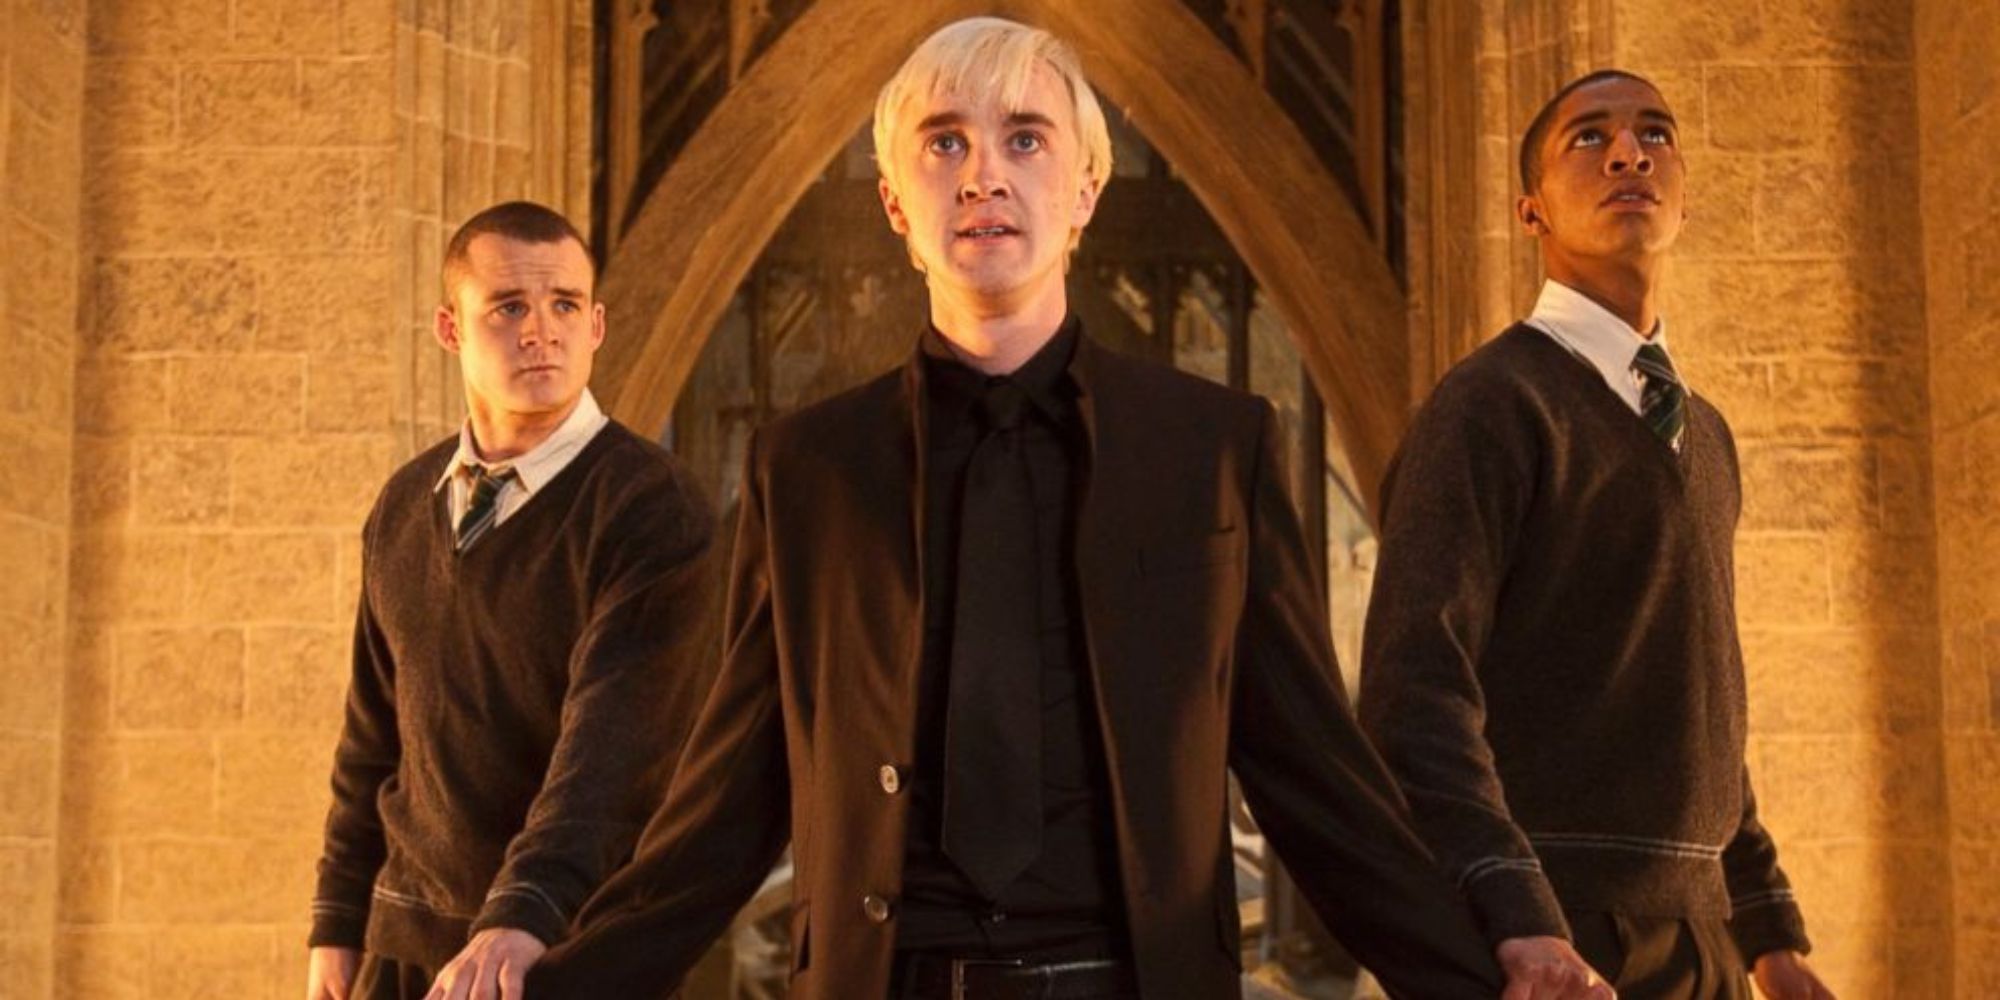 Draco Malfoy, Goyle and another Slytherin ready